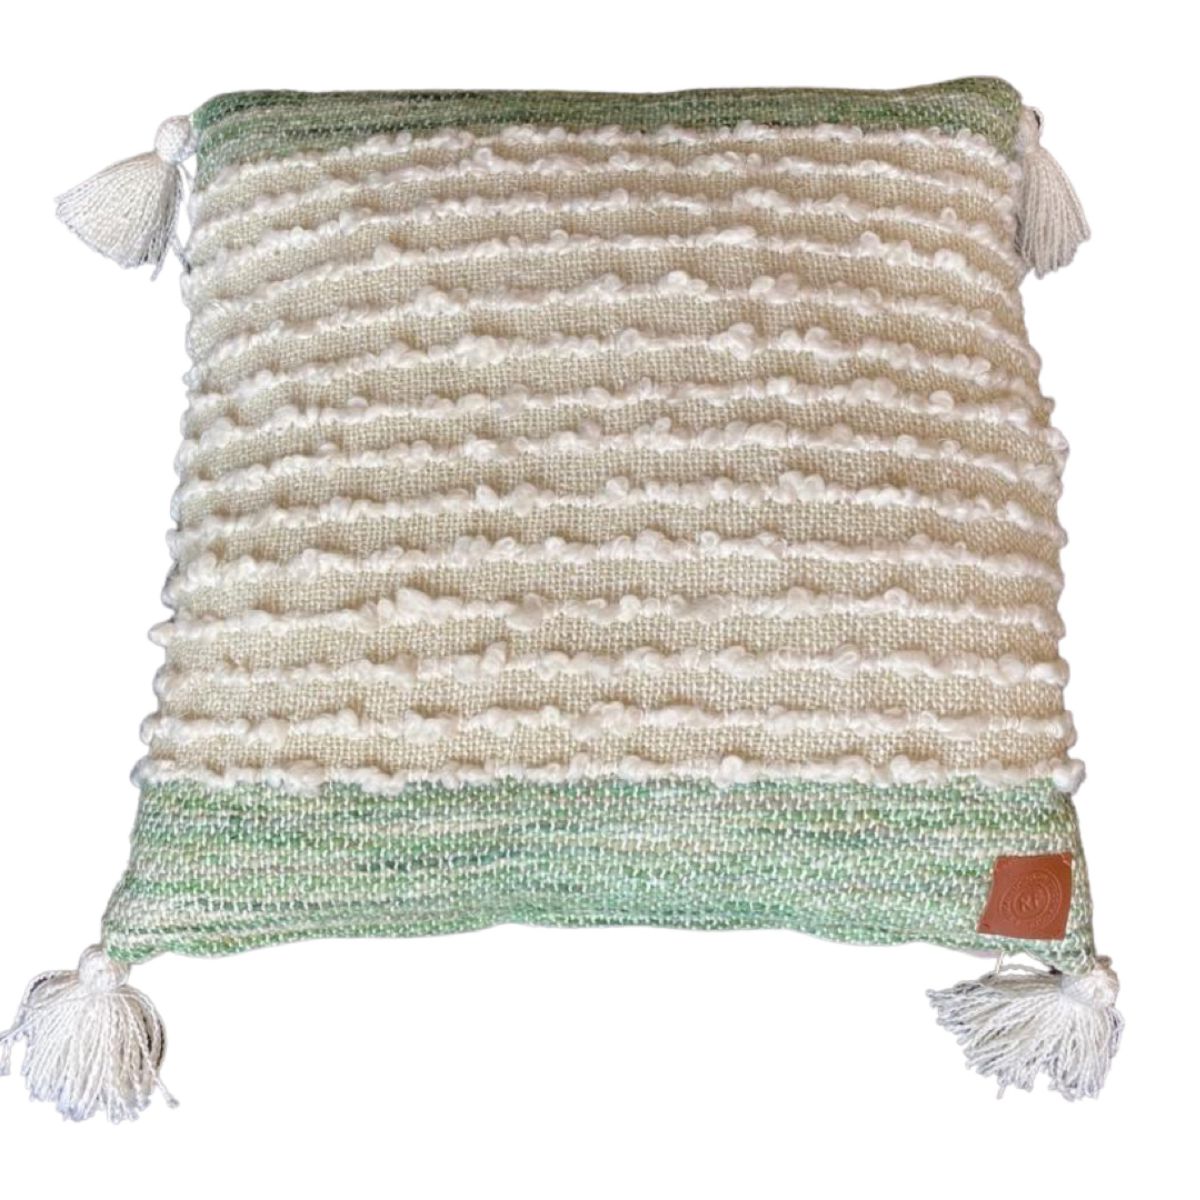 cushion square in green sage tones with tassels 50x50cm